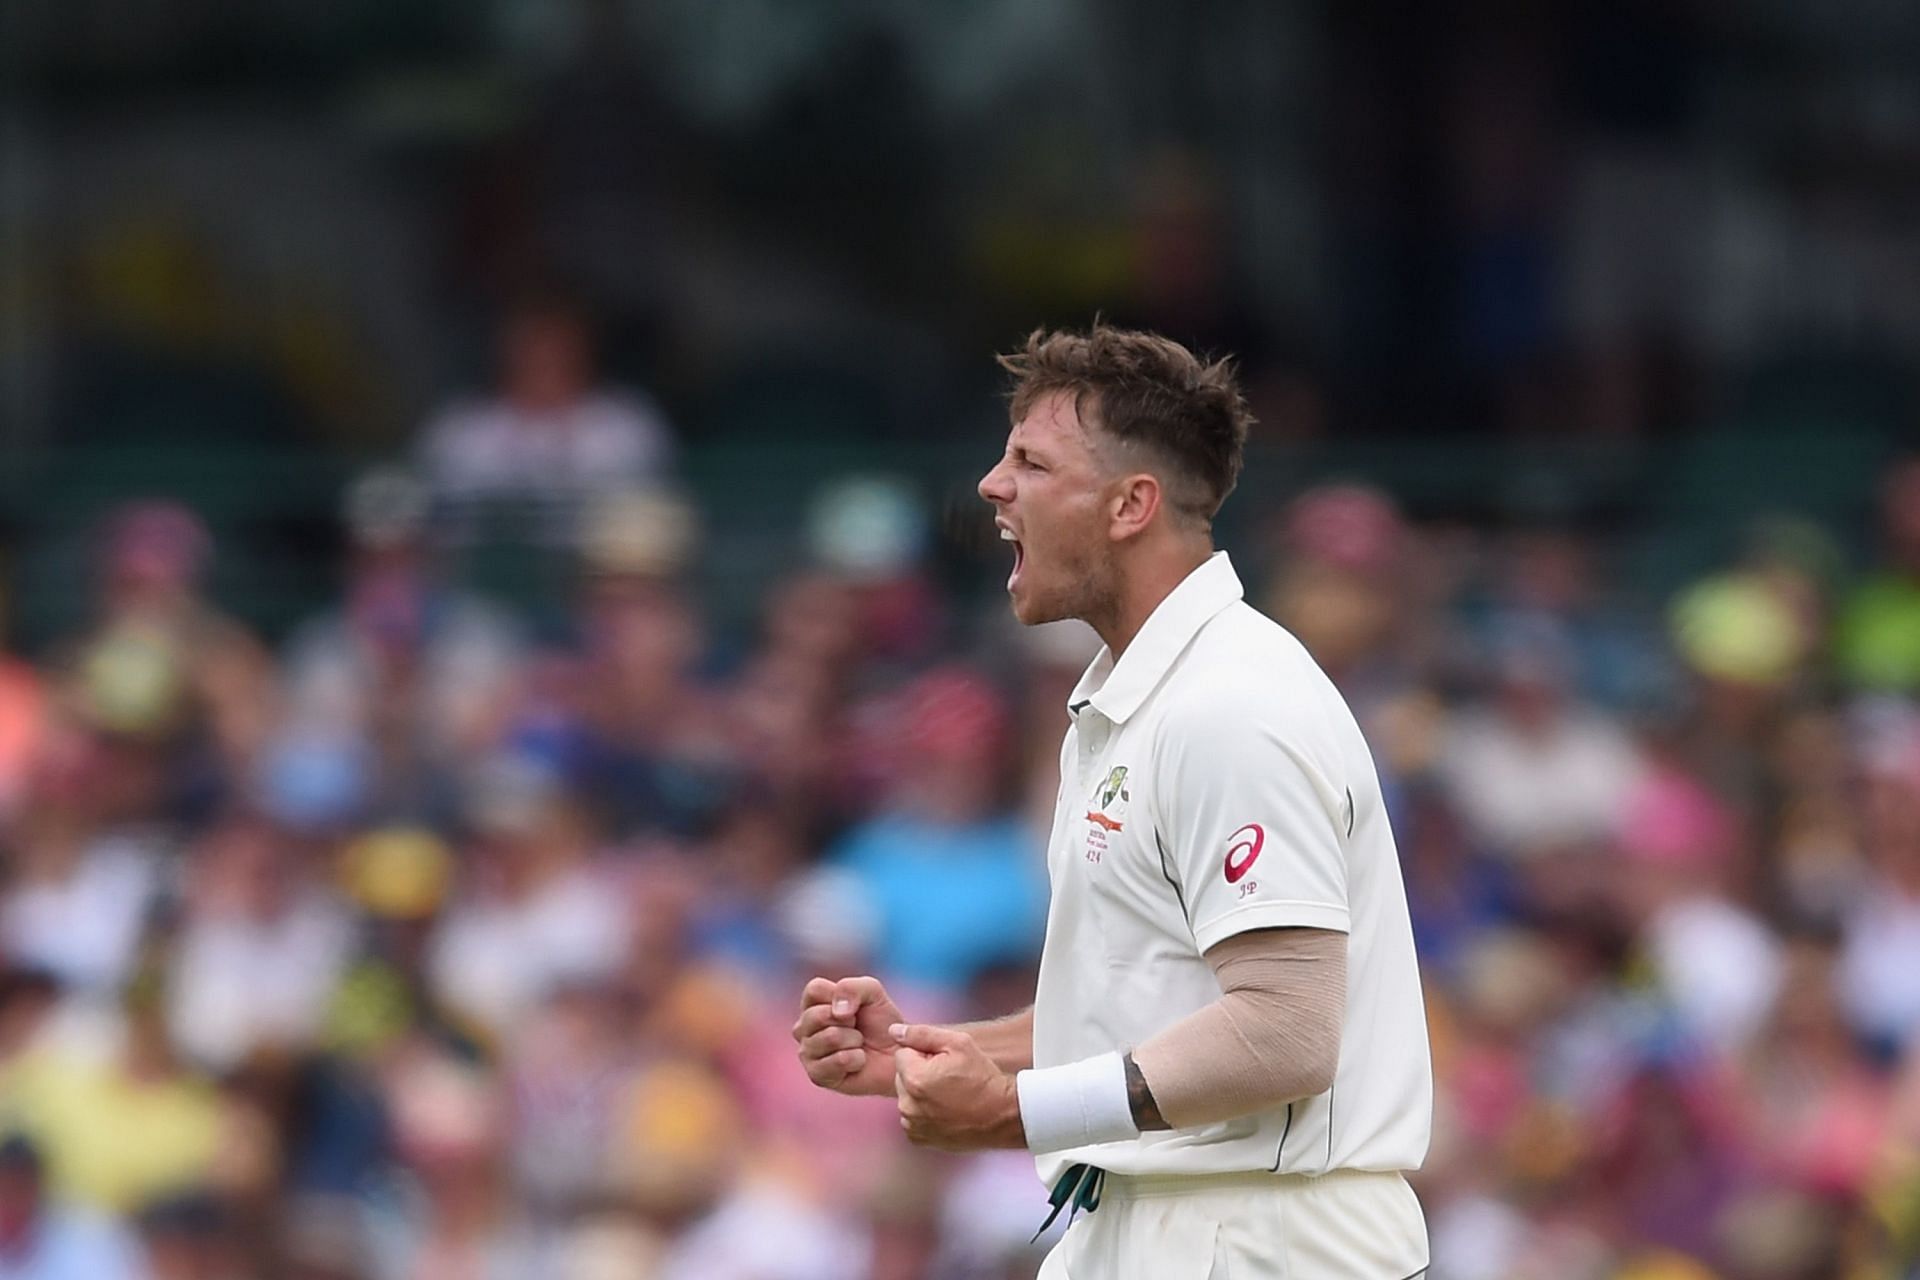 James Pattinson played international matches for Australia (Image courtesy: Getty Images)